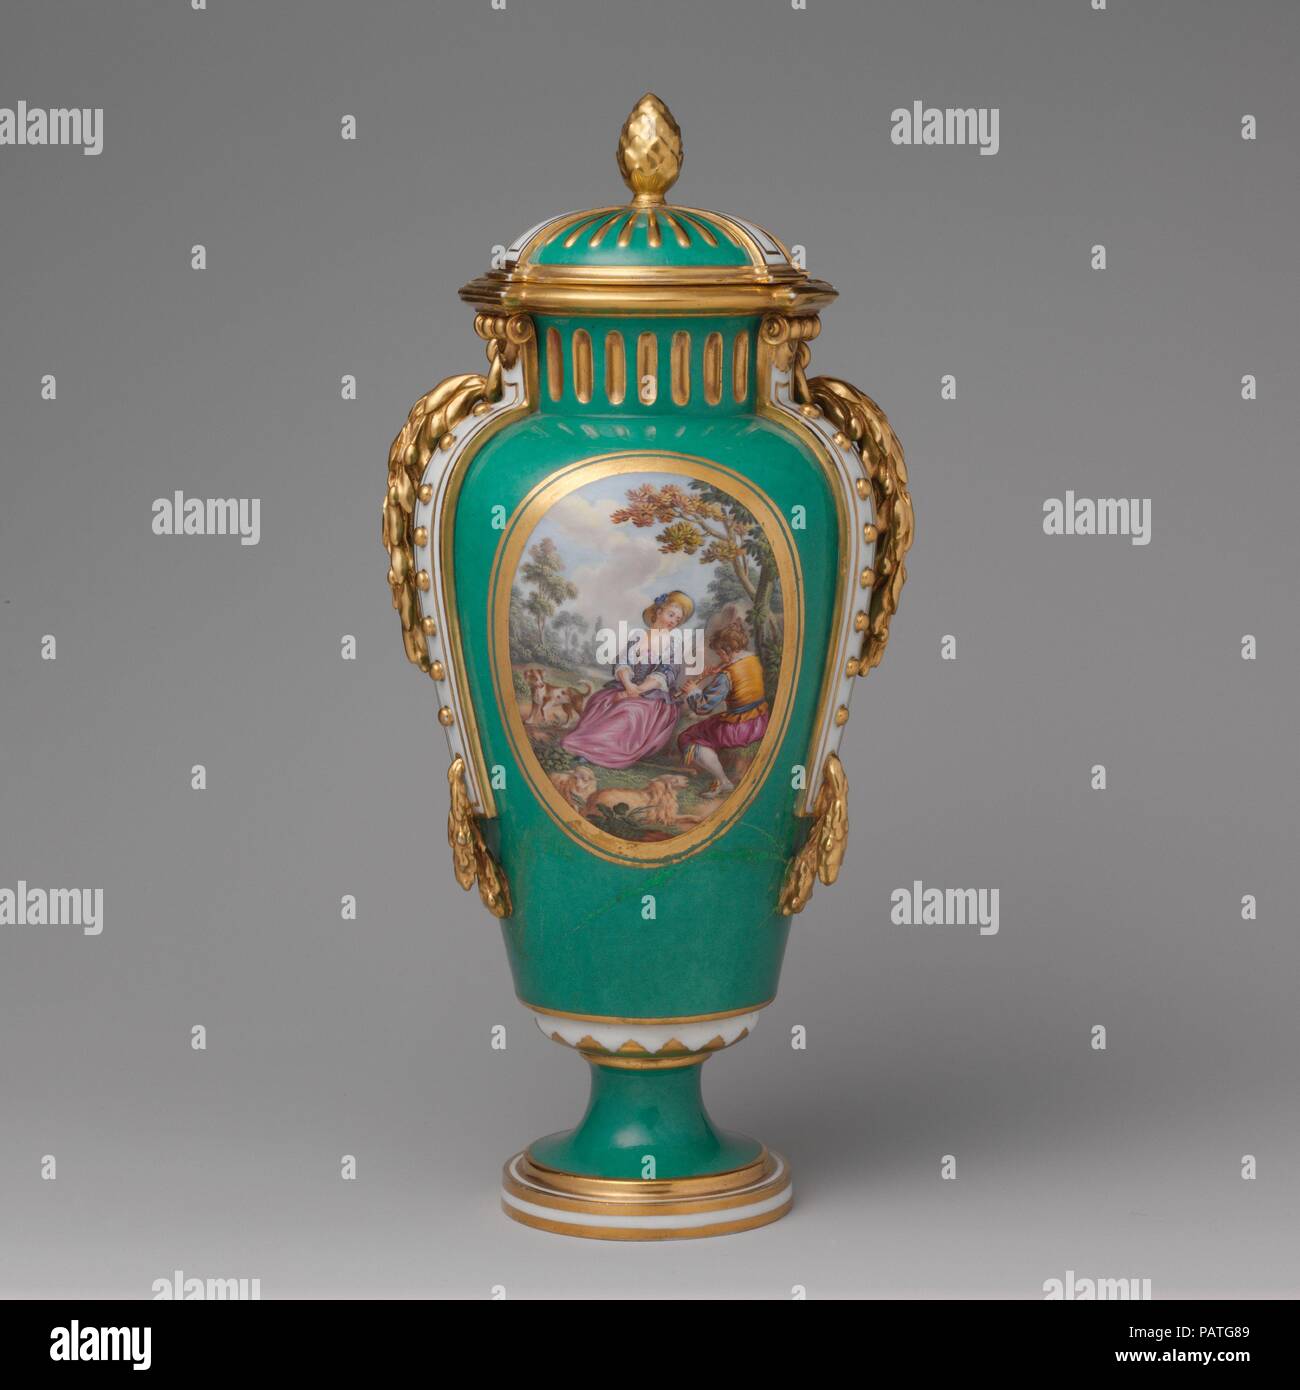 Vase with cover (vase à bandes) (one of a pair). Artist: After engravings by Louis Crépy (French); Based on a composition by Antoine Watteau (French, Valenciennes 1684-1721 Nogent-sur-Marne). Culture: French, Sèvres. Decorator: Gilded by Henry-Martin Prévost (French, active 1757-97); Figures by Charles Nicolas Dodin (French, Versailles 1734-1803 Sèvres). Dimensions: H. 12 15/16 in. (32.9 cm.). Factory: Sèvres Manufactory (French, 1740-present). Date: ca. 1770-75.  The bucolic scenes on the front of these vases (see also 58.75.68a, b) are after compositions by the French painter Jean-Antoine Wa Stock Photo